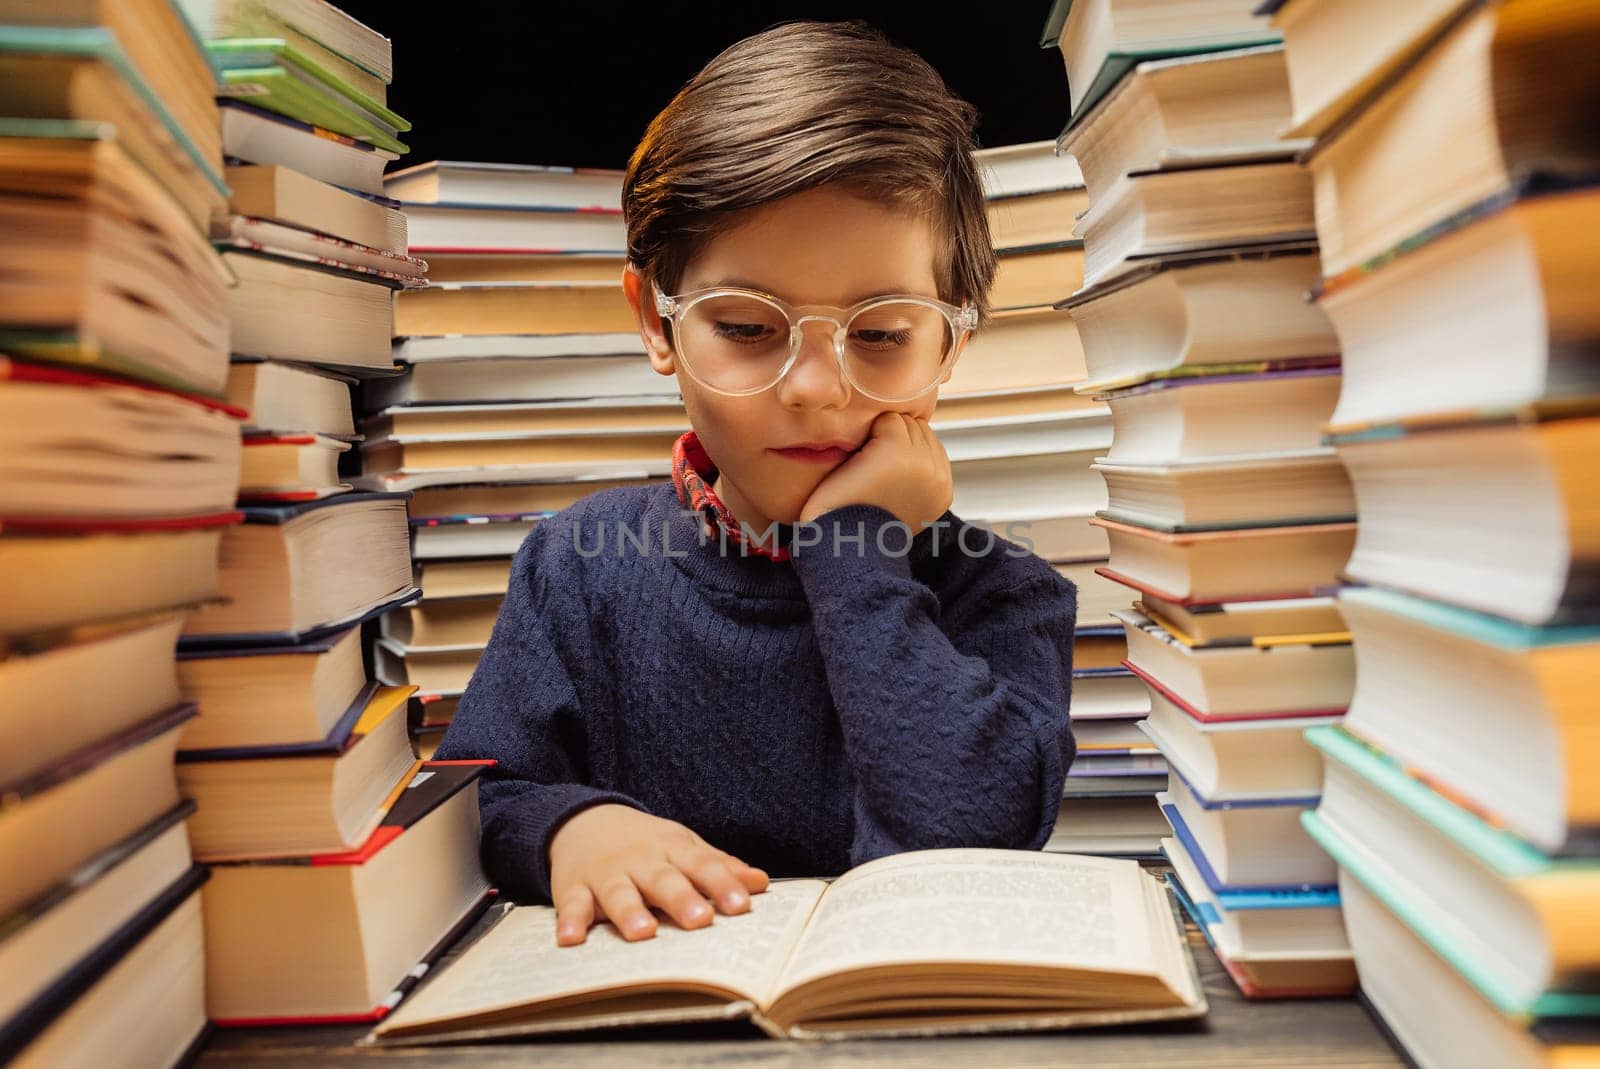 Cute little pupil boy in glasses reading interesting book in library between stacks of books literature. Education concept, prep or elementary school by kristina_kokhanova